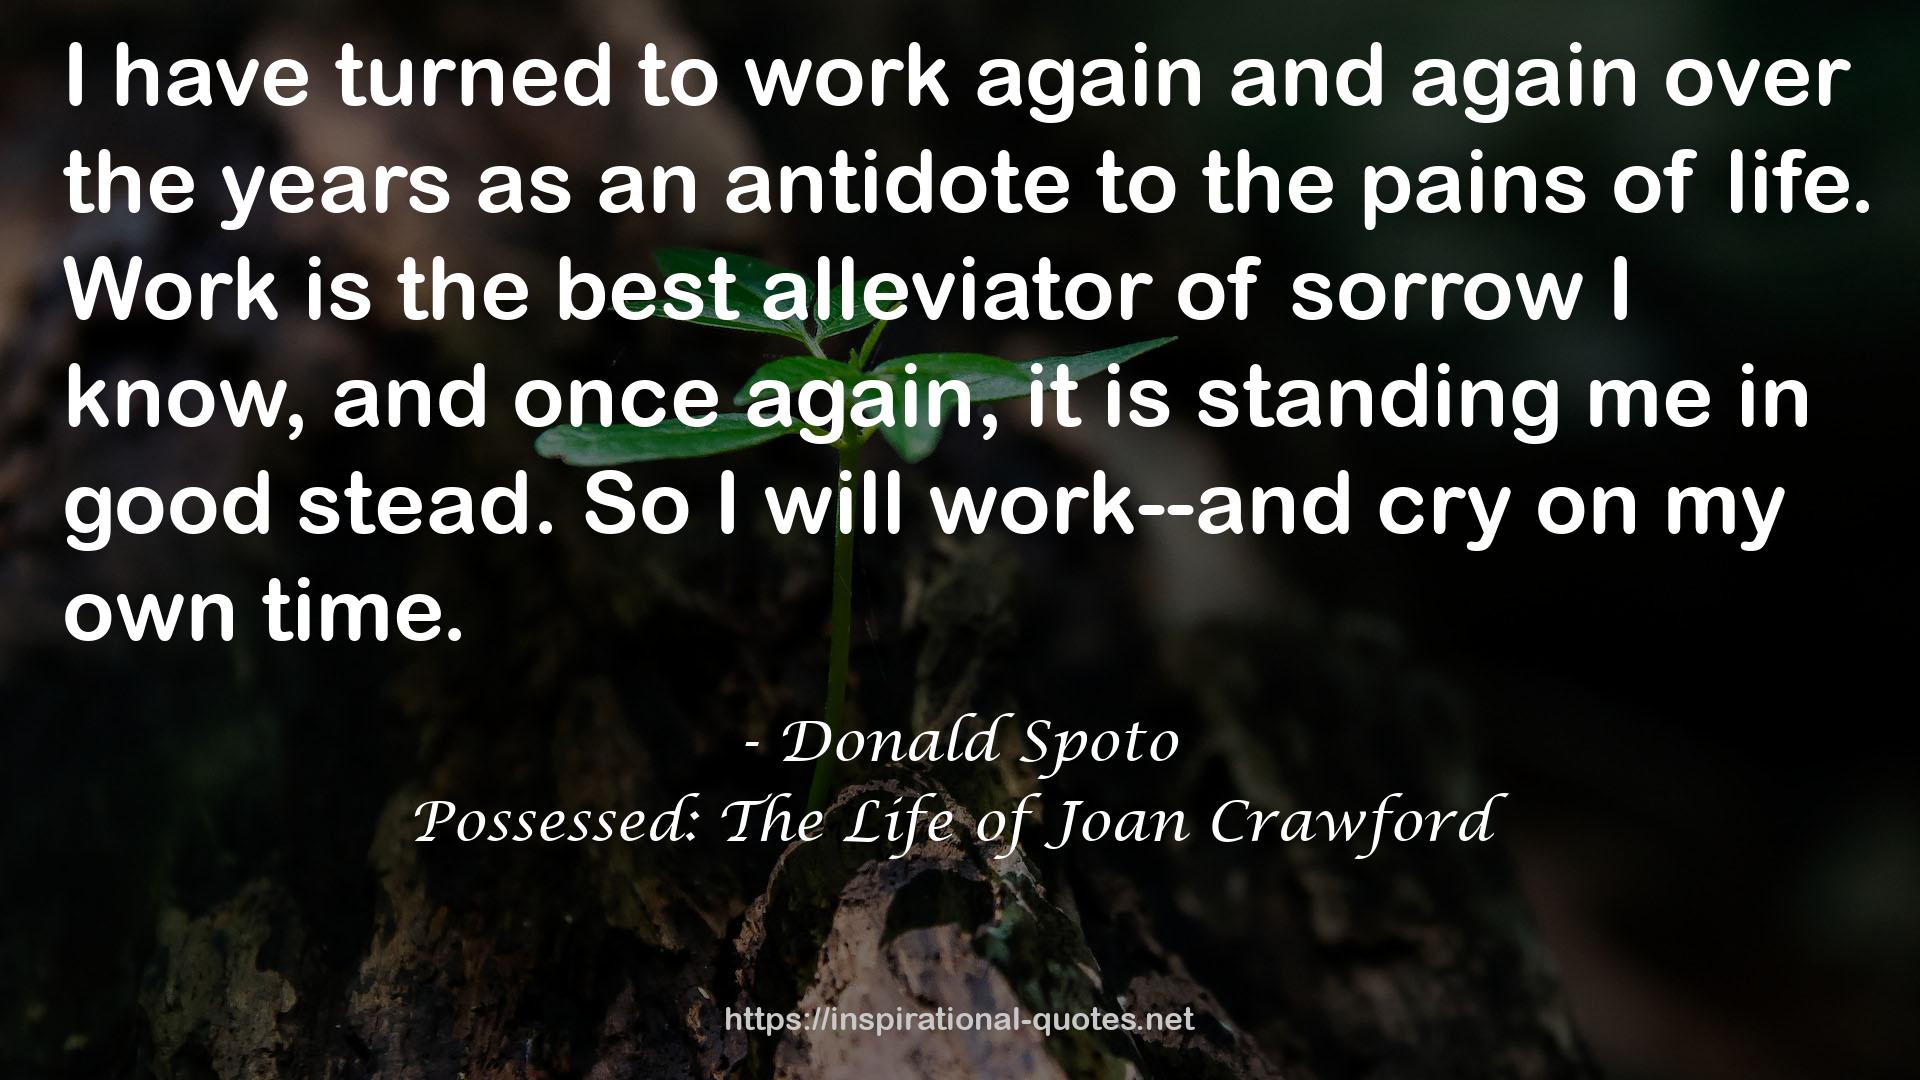 Possessed: The Life of Joan Crawford QUOTES